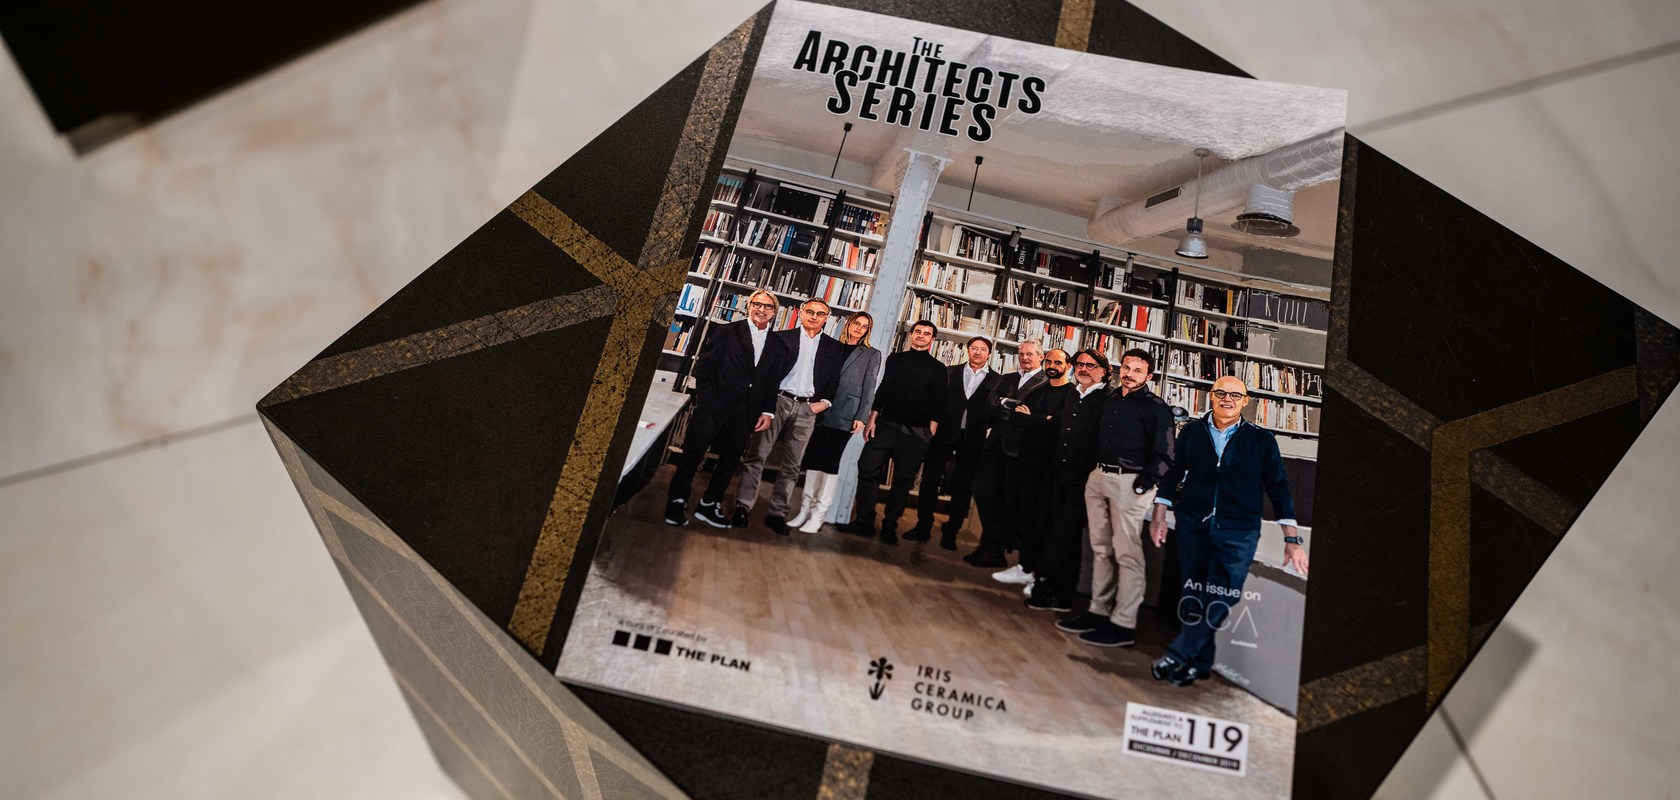 THE ARCHITECTS SERIES – A DOCUMENTARY ON: GCA Architects